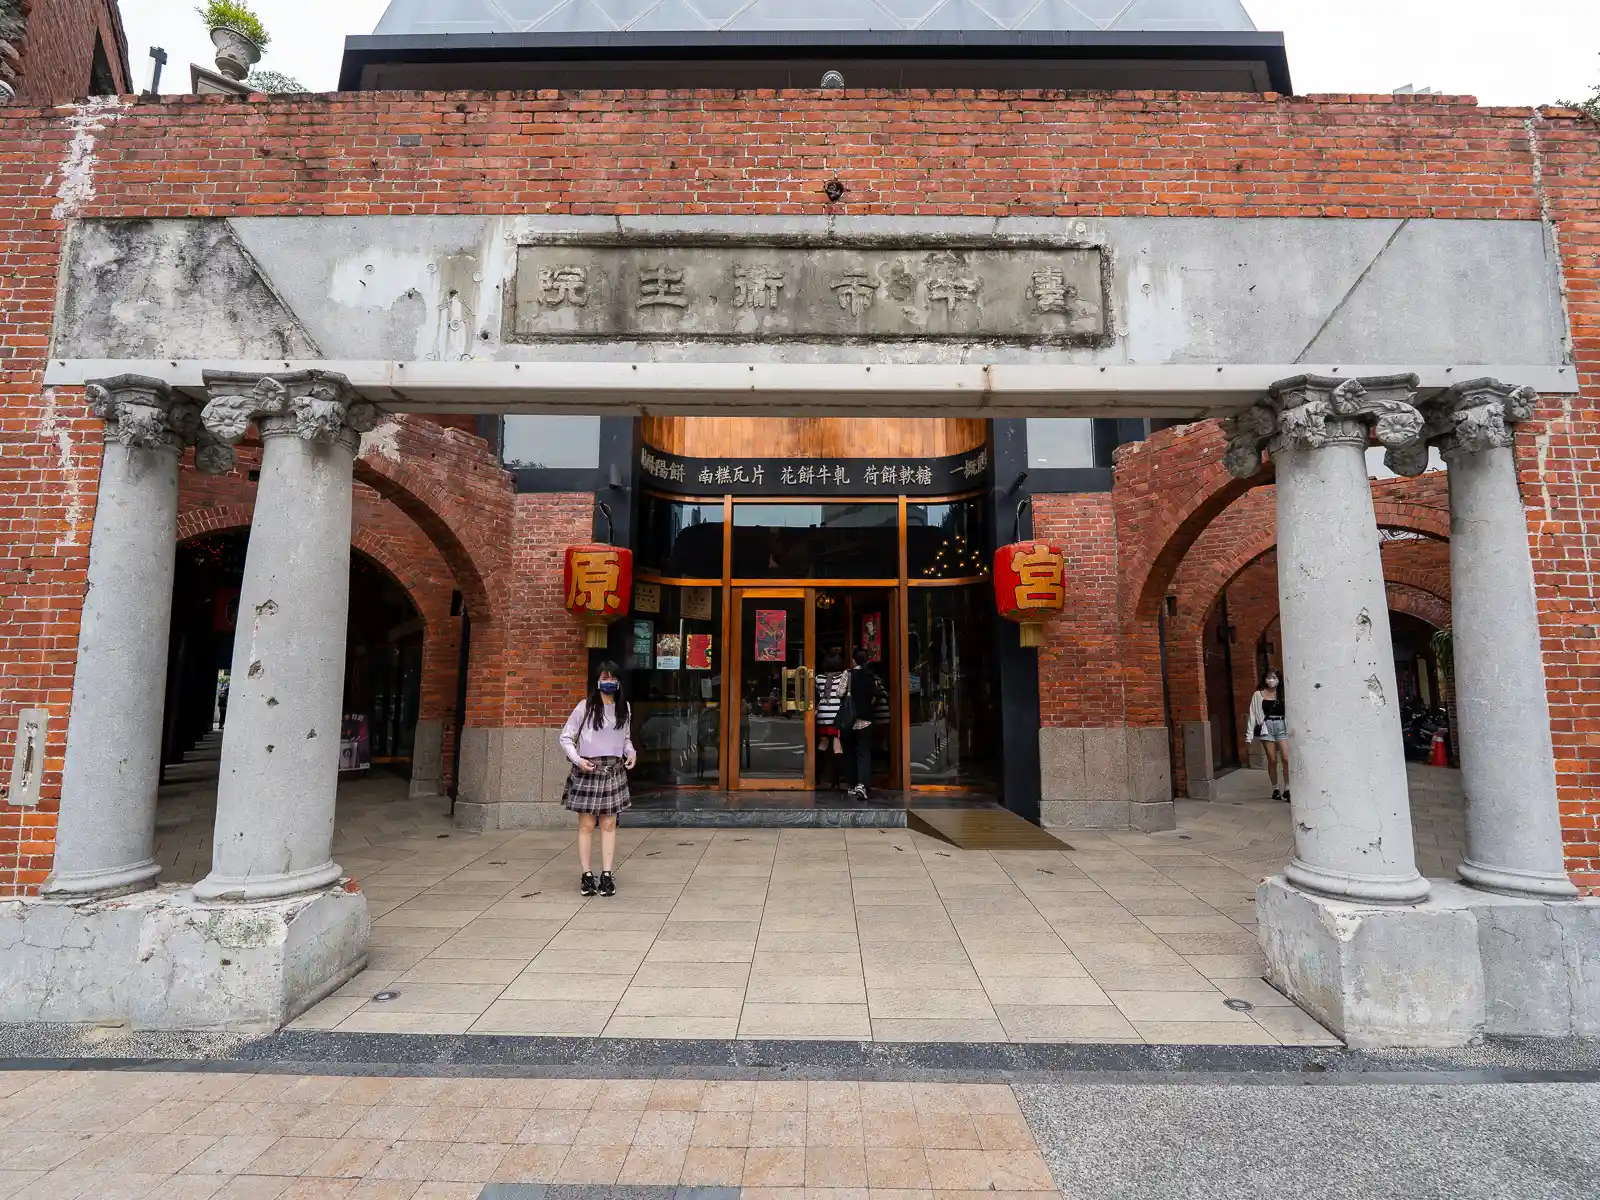 The red-brick and carved stone entrance to Miyahara has been well preserved.